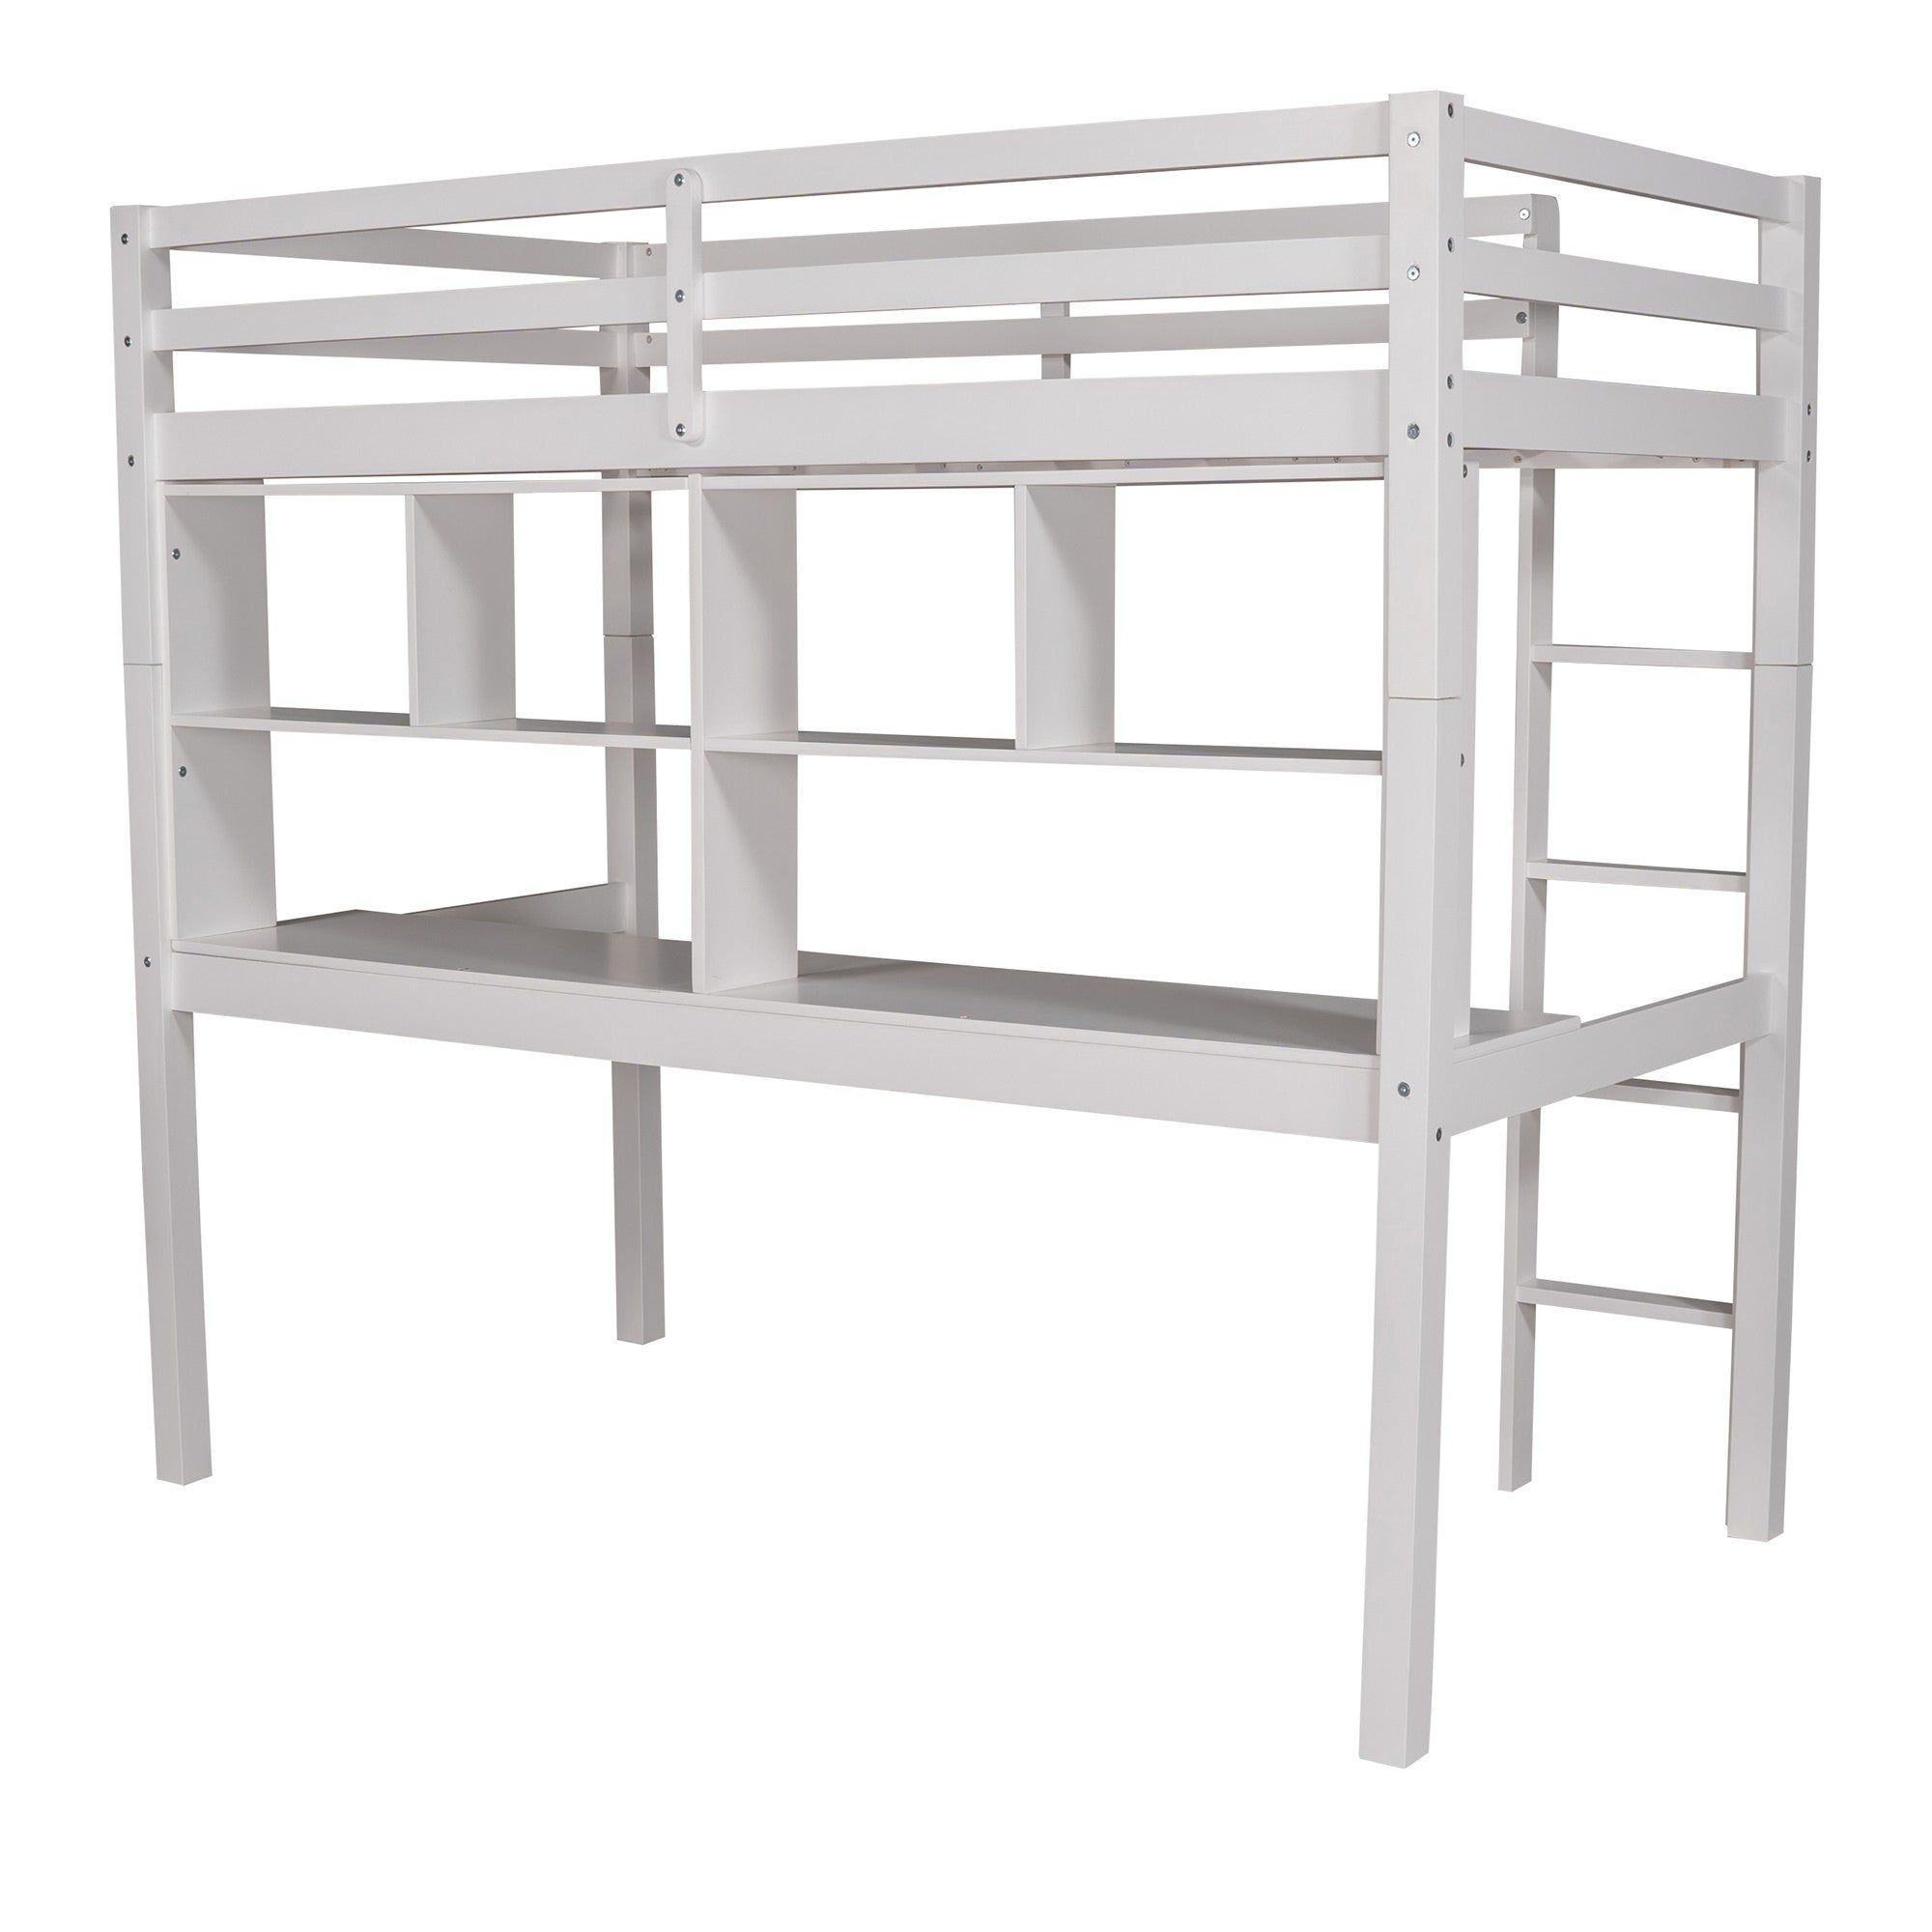 White Twin Loft Bed With Desk and Shelves Default Title